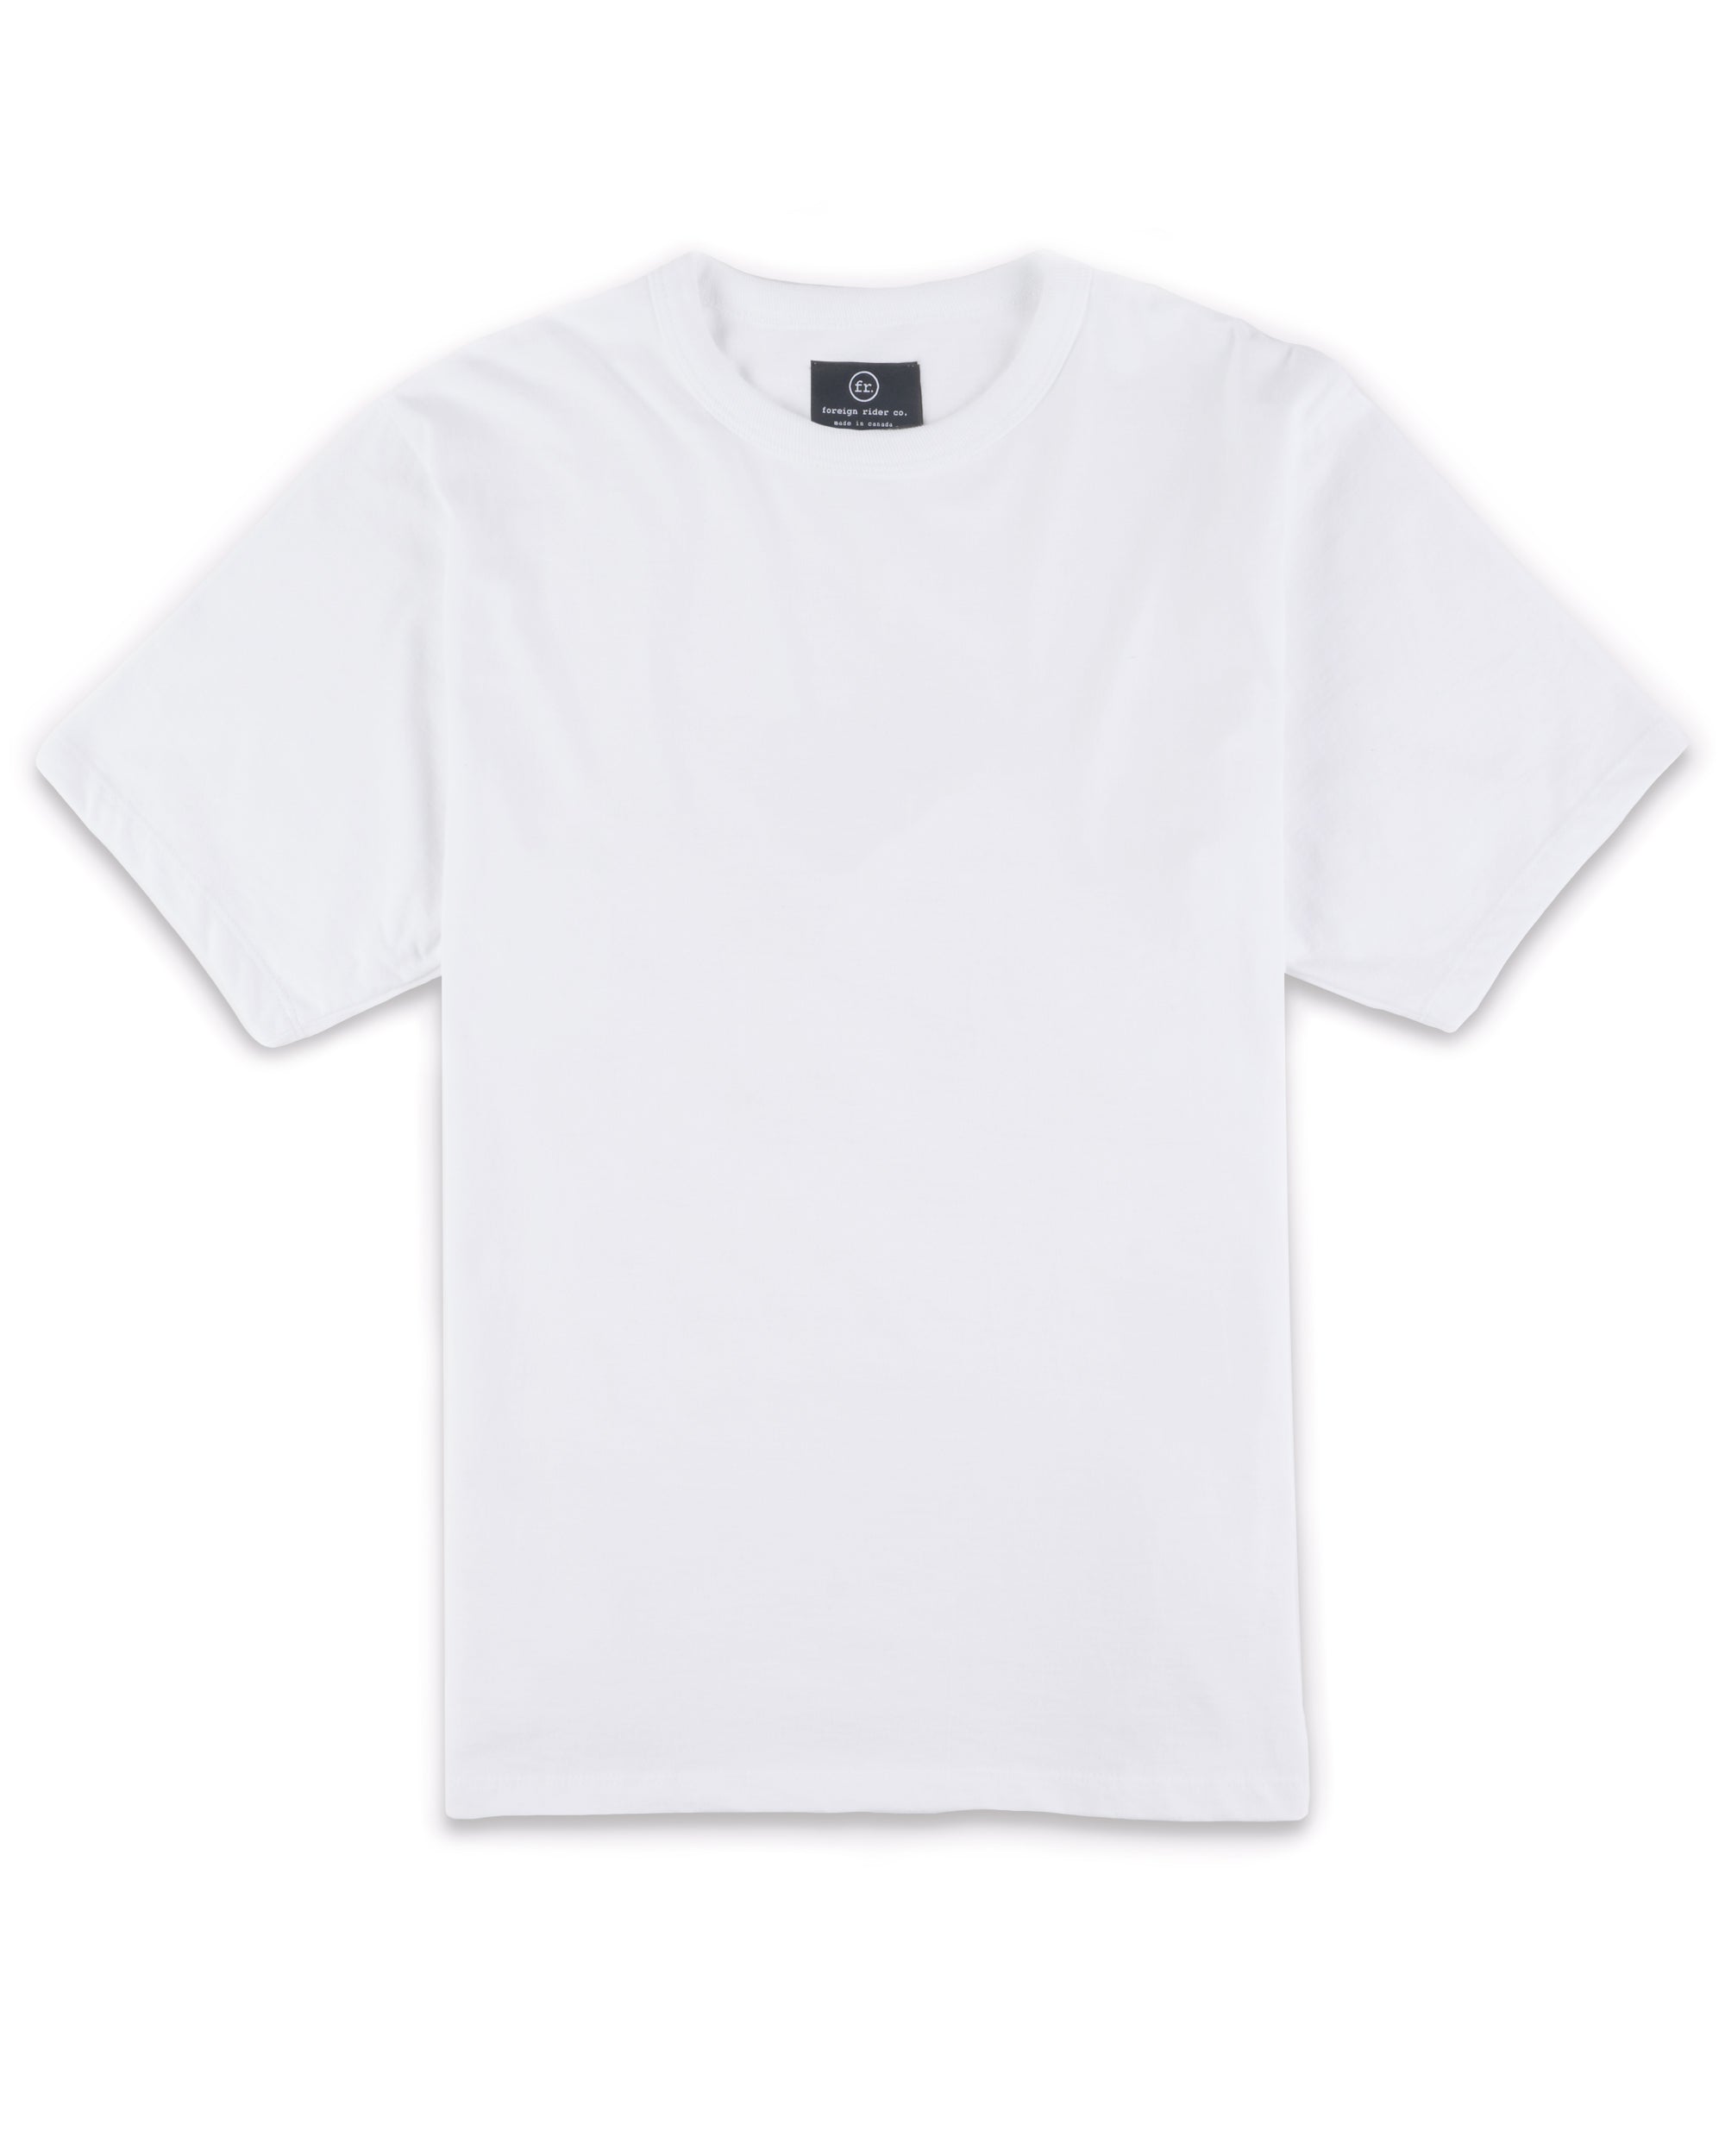 Supima SS T-Shirt White - Foreign Rider Co.